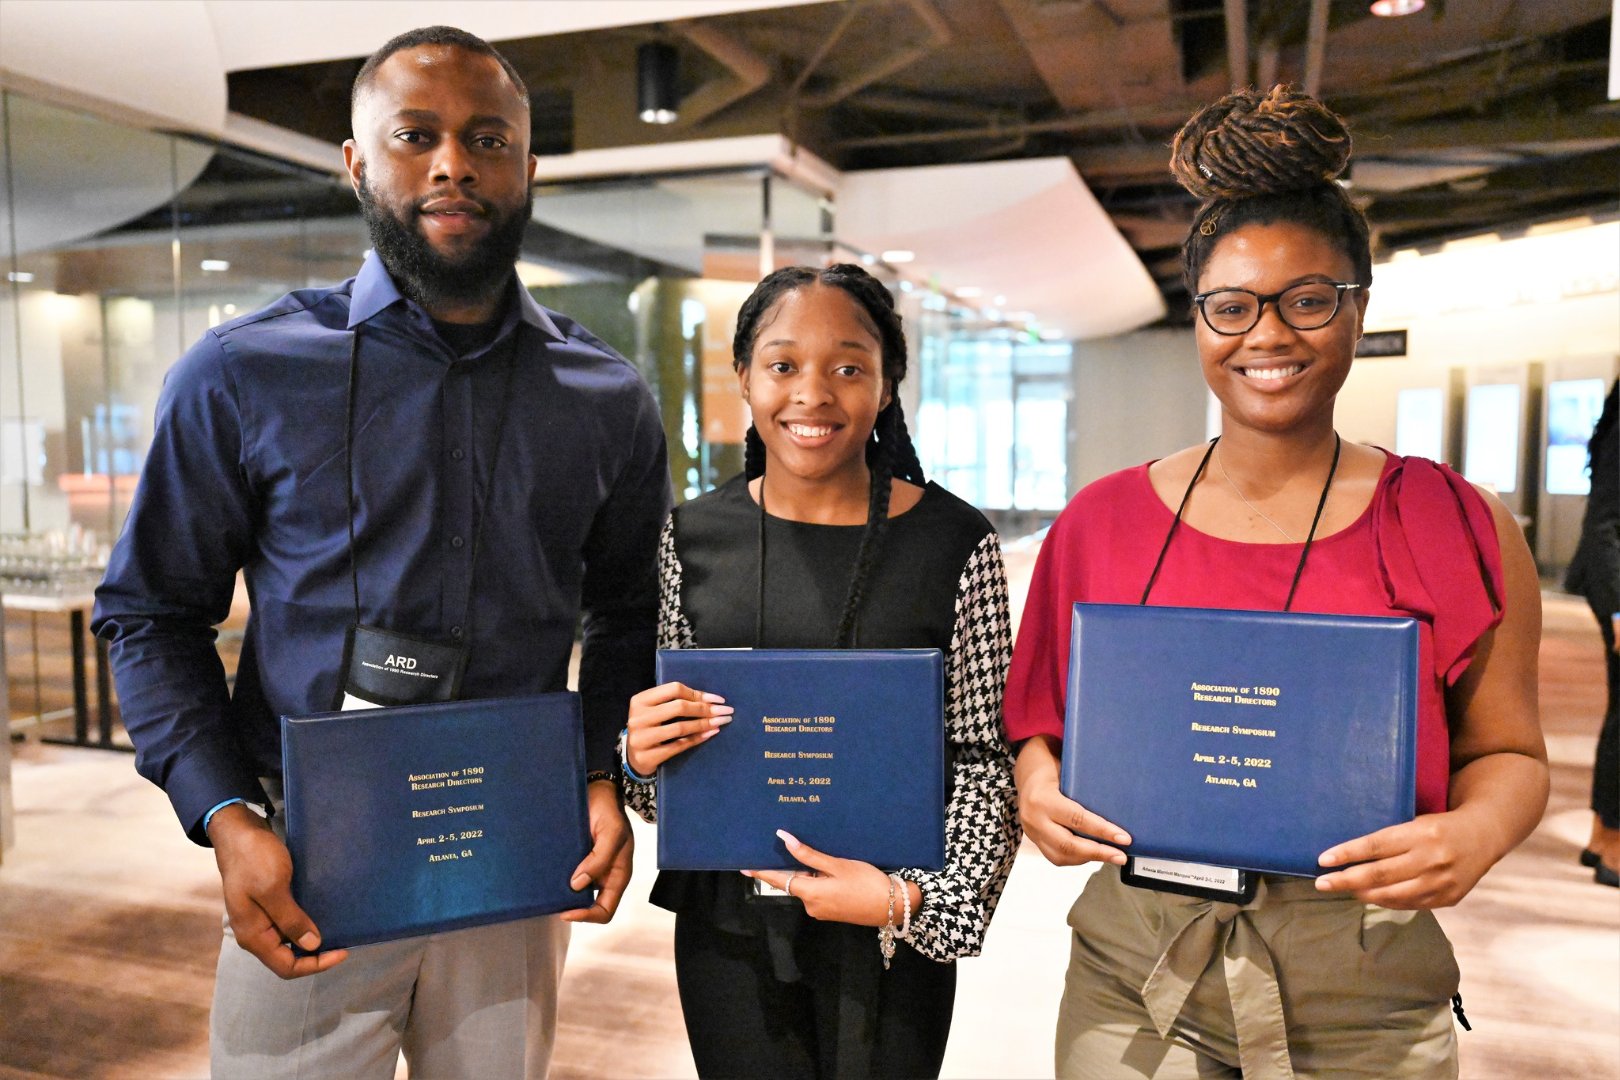 Pictured from left, Fort Valley State University students Nnamdi Eneh, Kearis Ivey and Vernita Smith won awards at the 20th Research Symposium of the Association of 1890 Research Directors in Atlanta, Georgia.